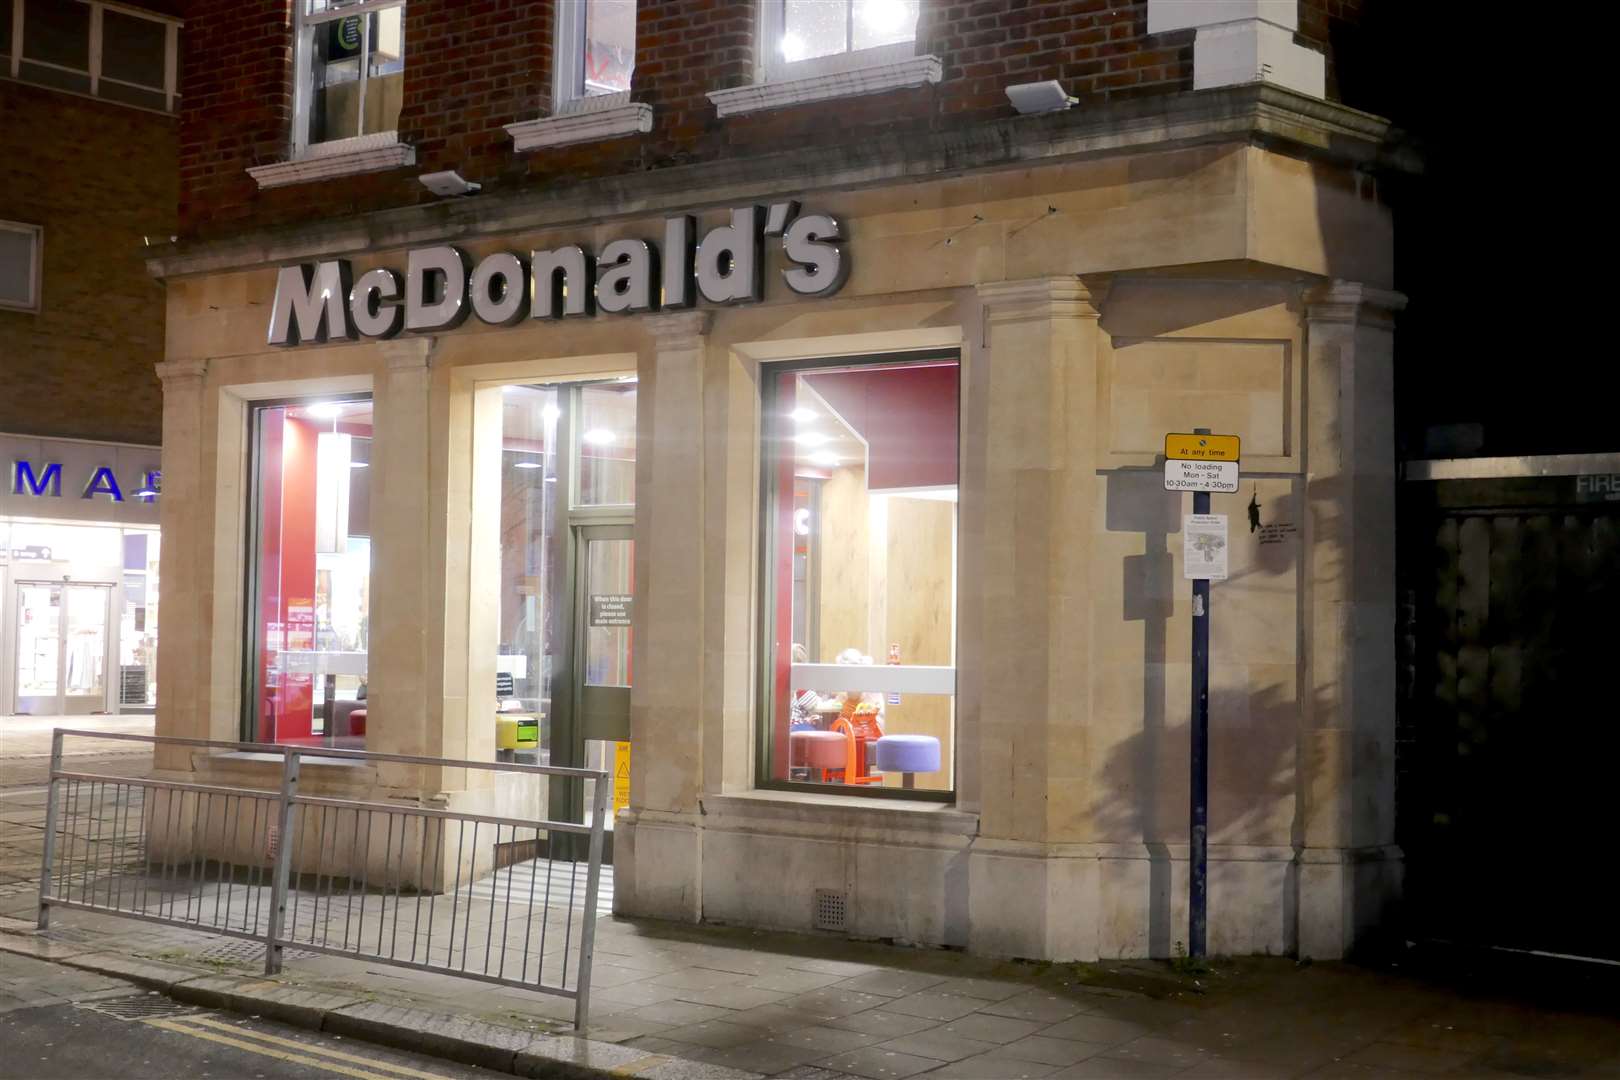 It is hoping to compete with the likes of McDonald’s which is open past 11pm